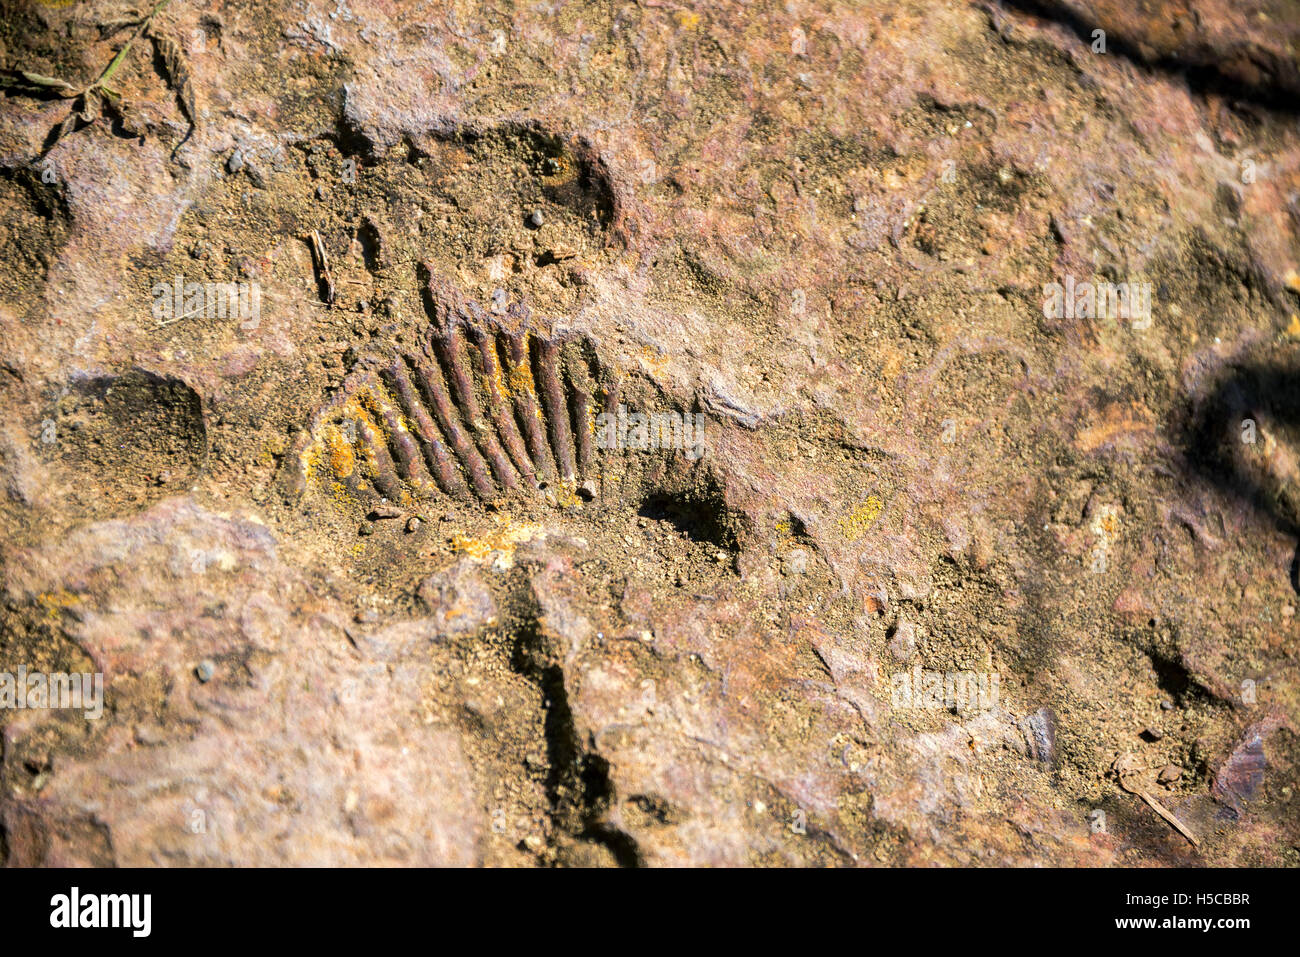 View of an ammonite fossil near Barichara, Colombia Stock Photo